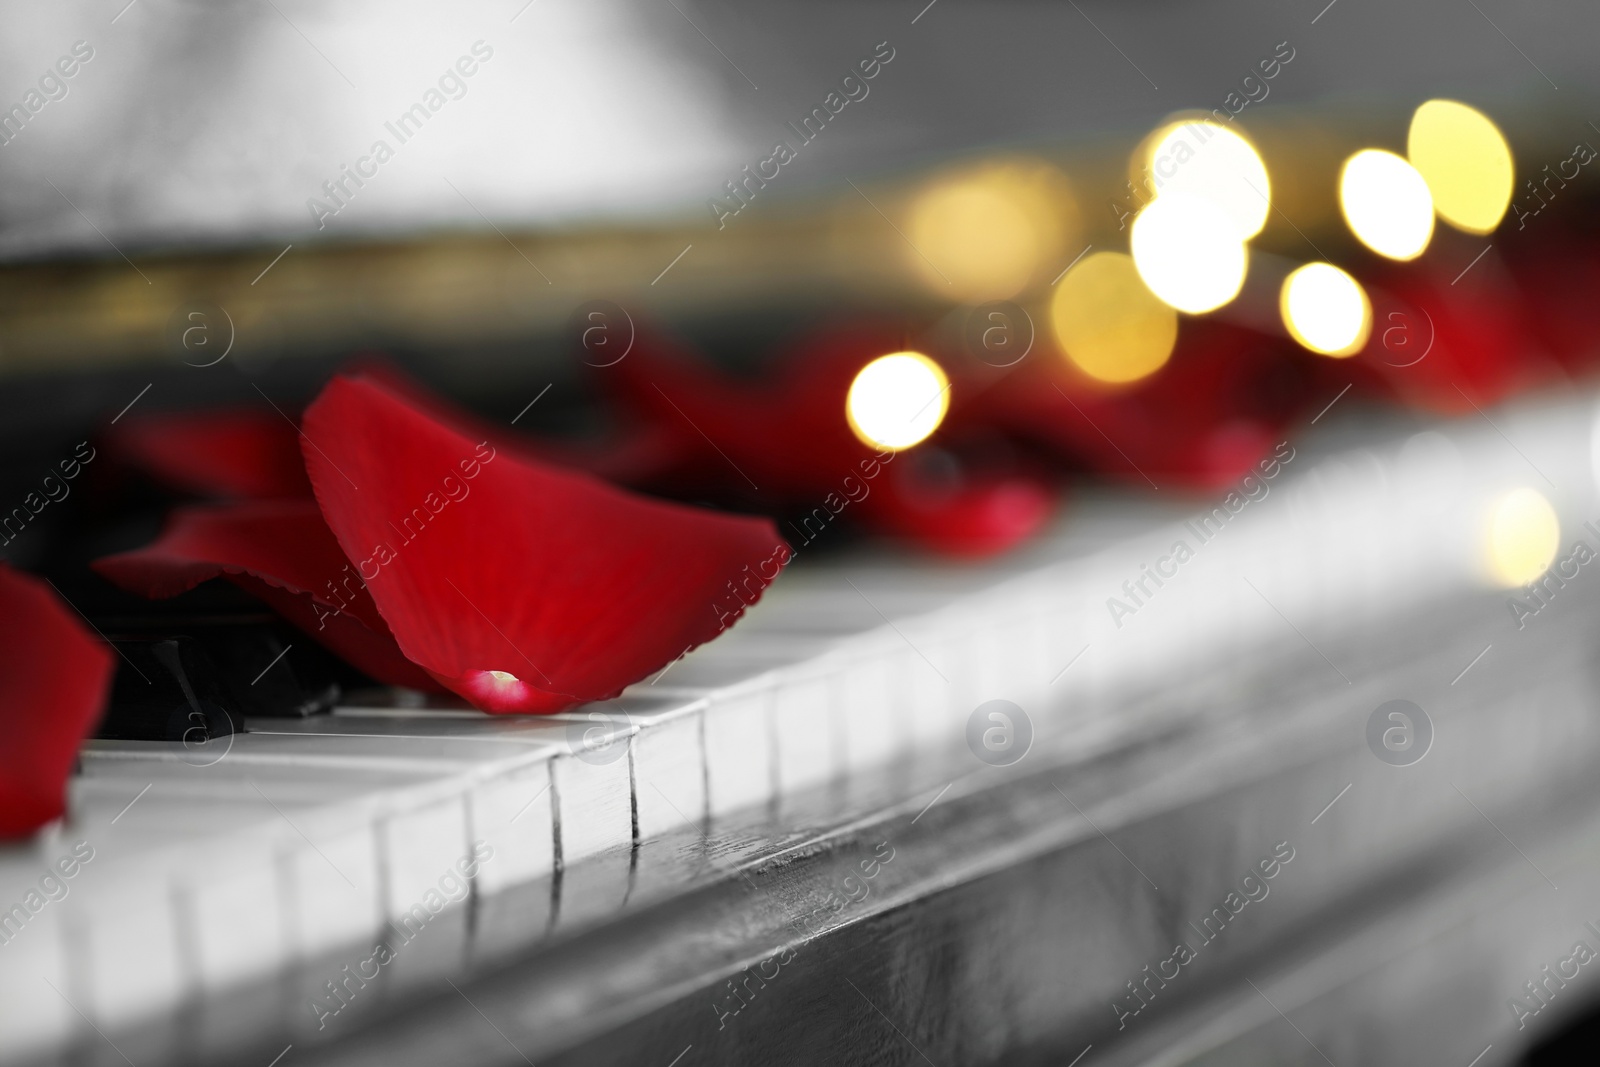 Photo of Many red rose petals on piano keys against blurred festive lights, closeup. Space for text